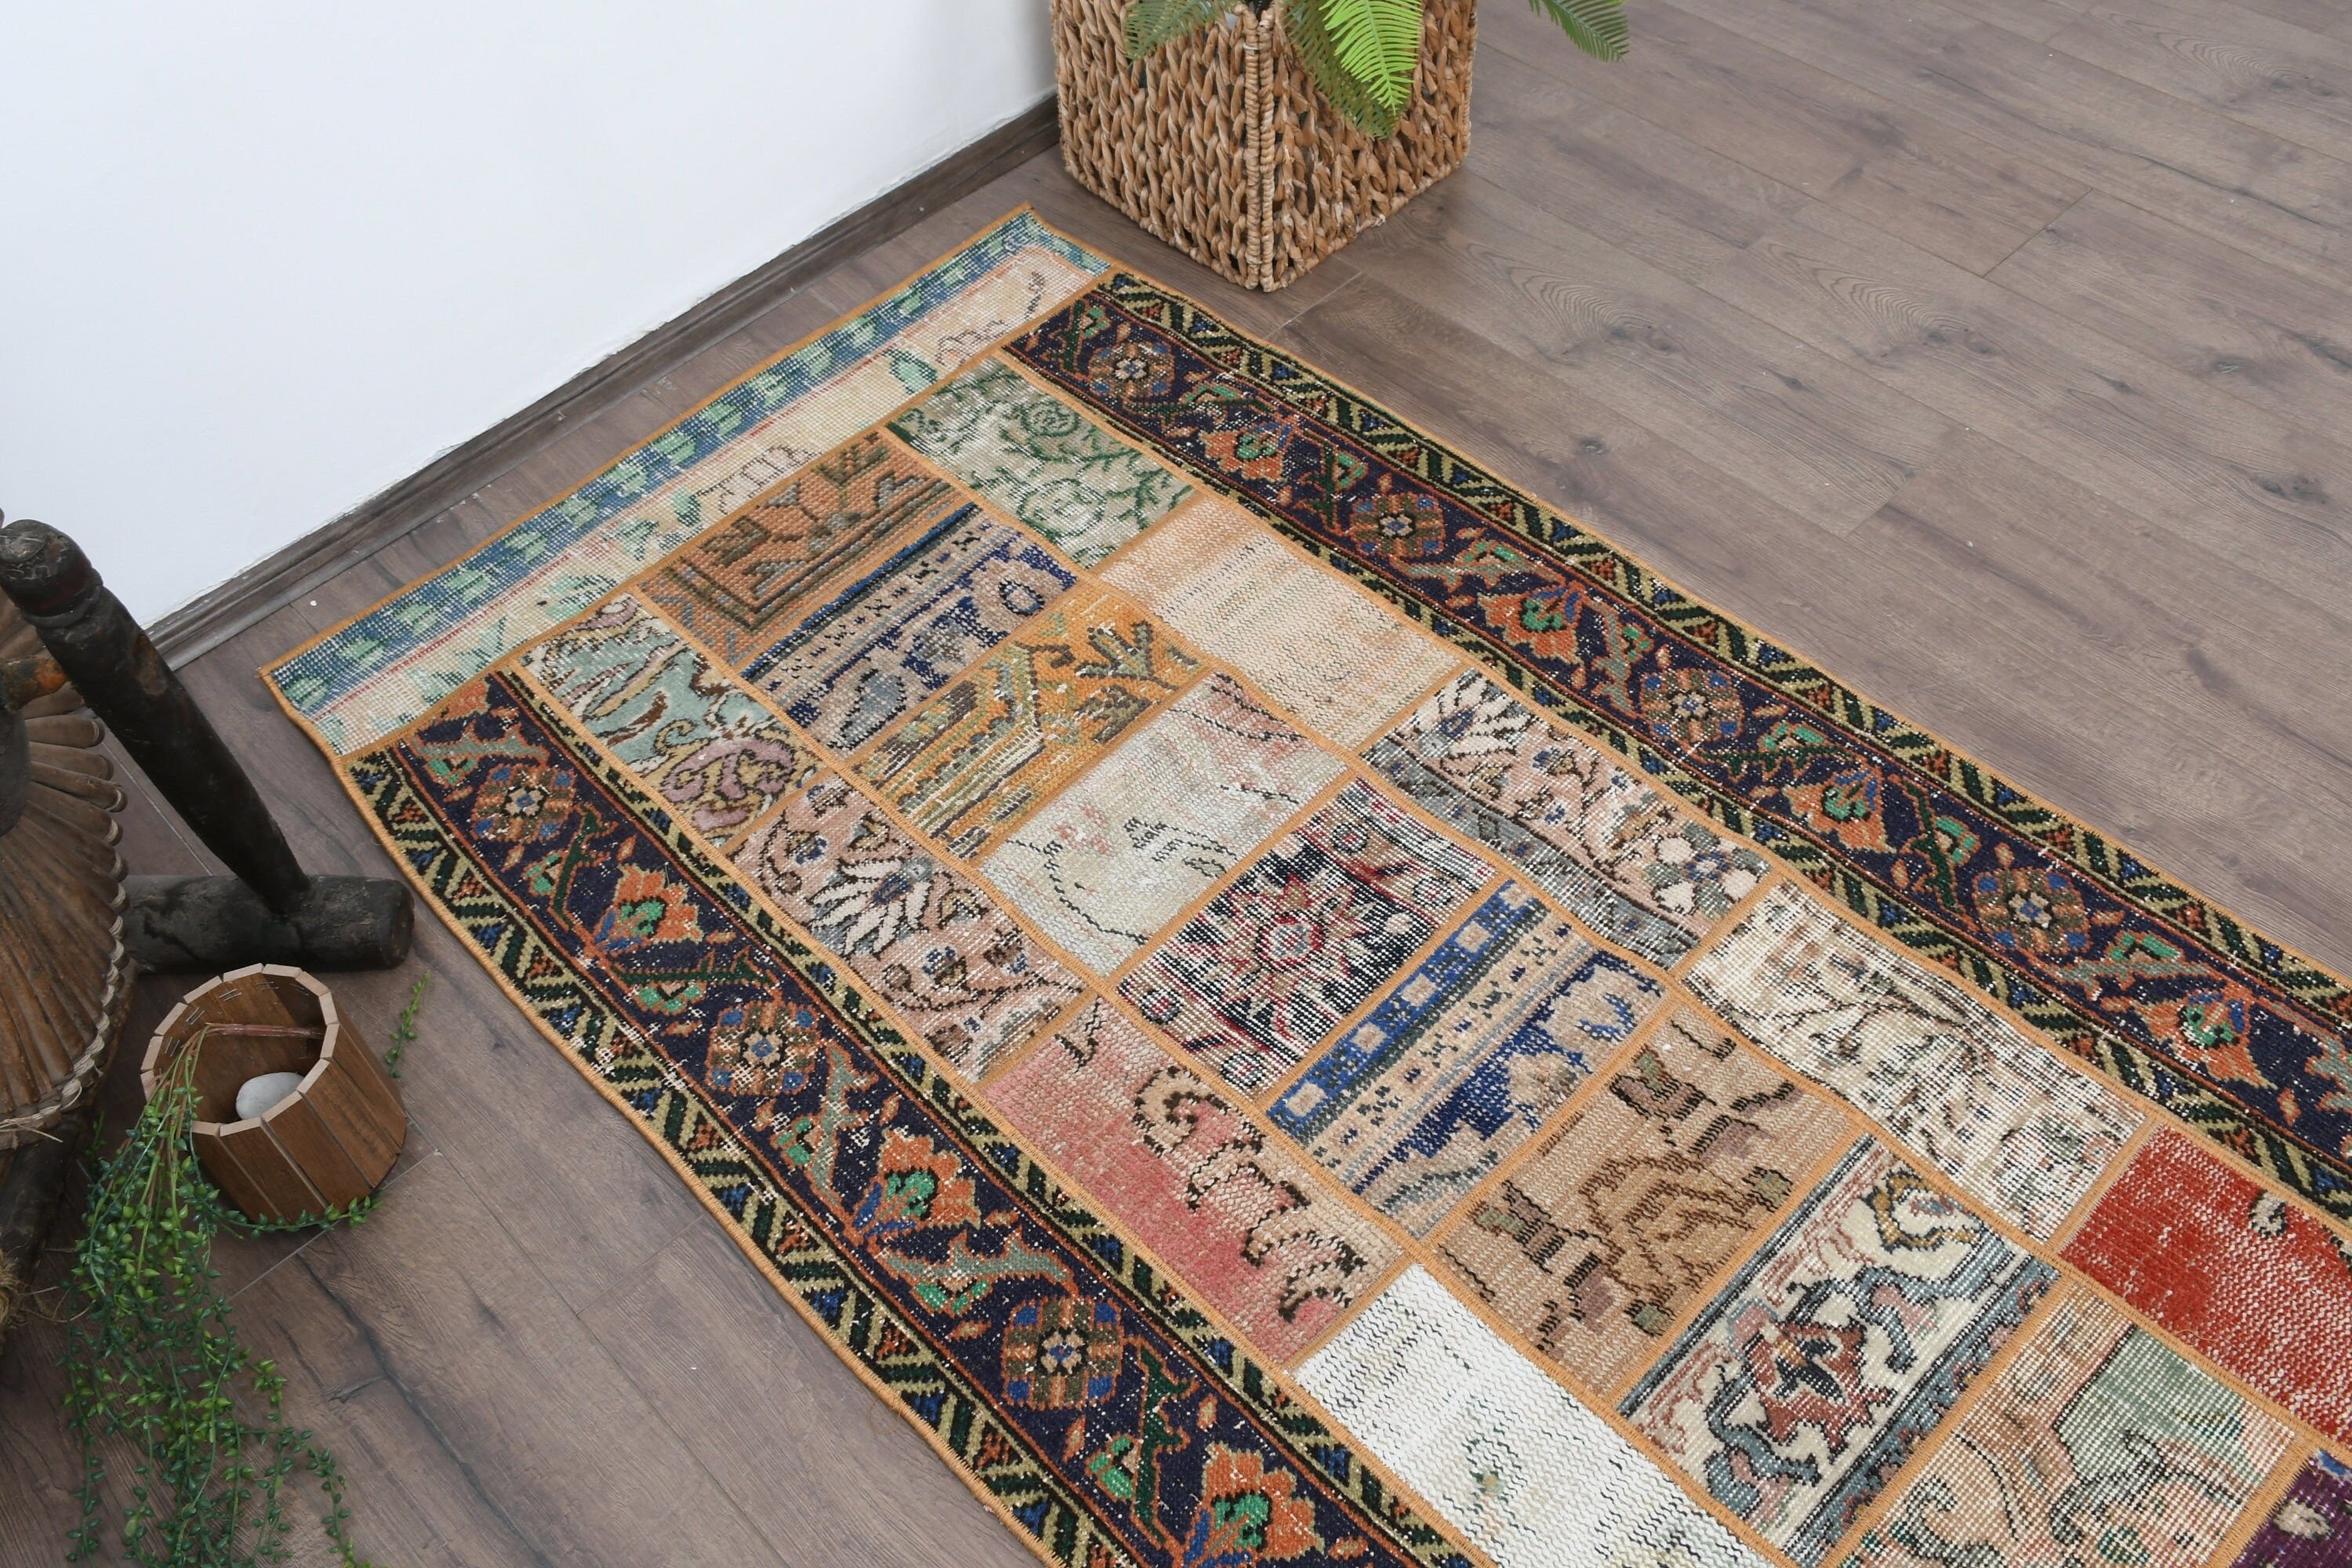 Entry Rug, Blue Anatolian Rug, Vintage Rug, Cool Rug, Bedroom Rugs, 2.9x6.4 ft Accent Rug, Rugs for Kitchen, Anatolian Rug, Turkish Rugs